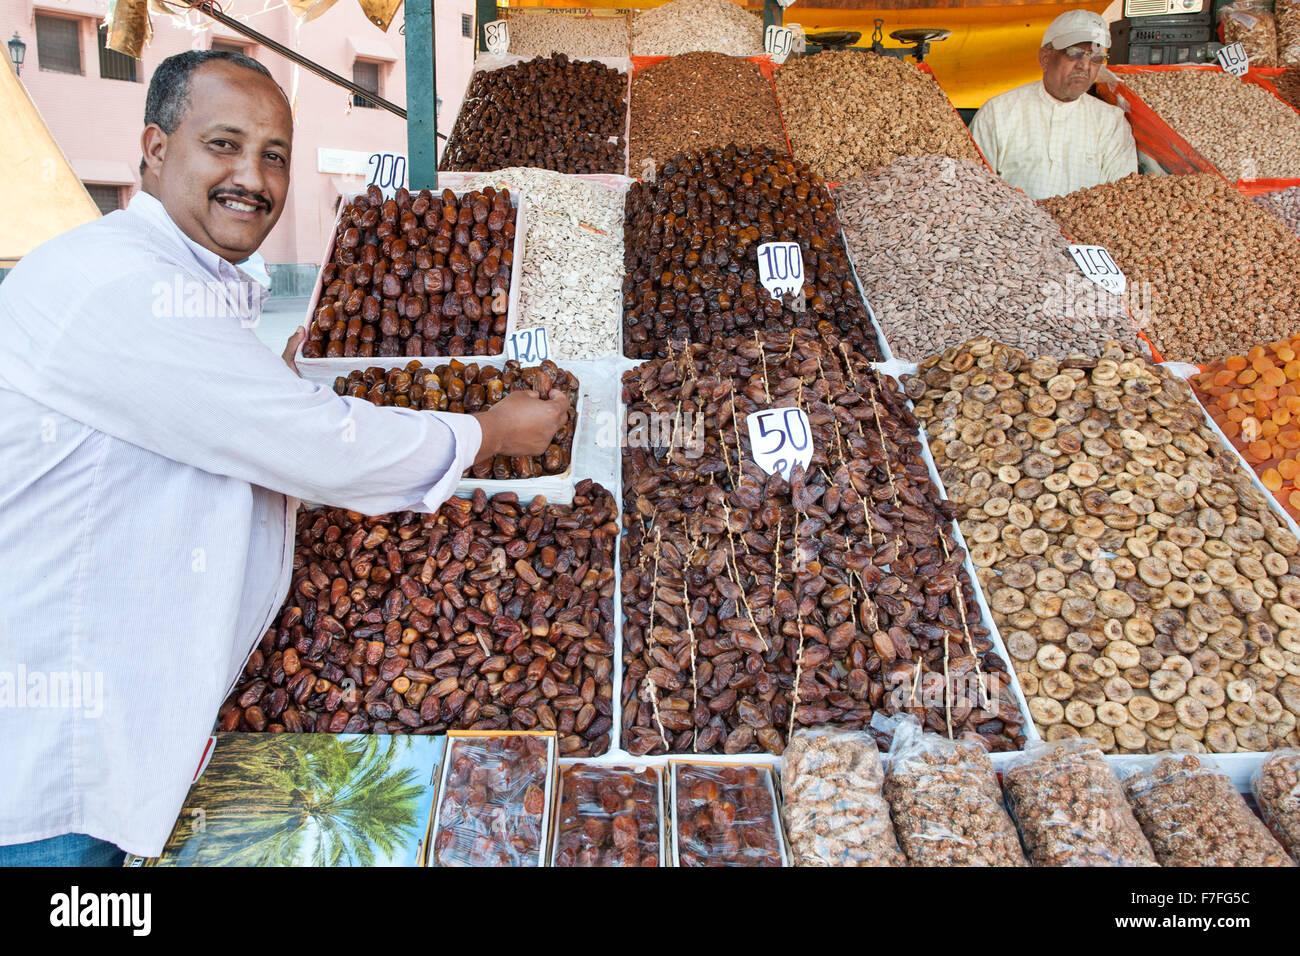 Dried fruit and nuts for sale in Marrakech, Morocco. Stock Photo